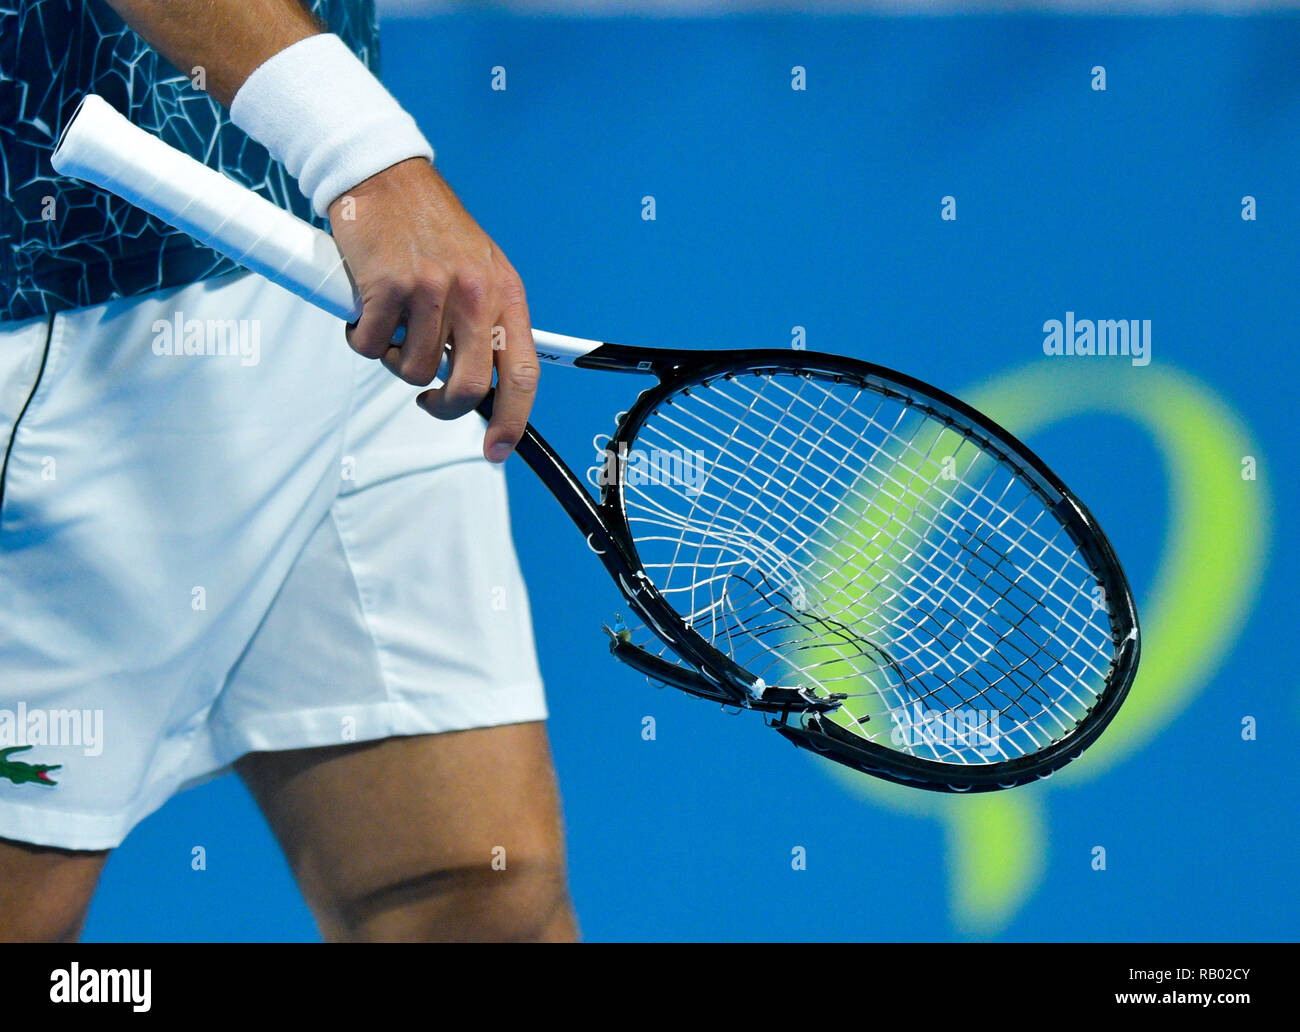 Beijing, Qatar. 4th Jan, 2019. Novak Djokovic of Serbia bolds his racquet  which he smashed during his semi-final match against Roberto Bautista Agut  of Spain at the ATP Qatar Open tennis tournament